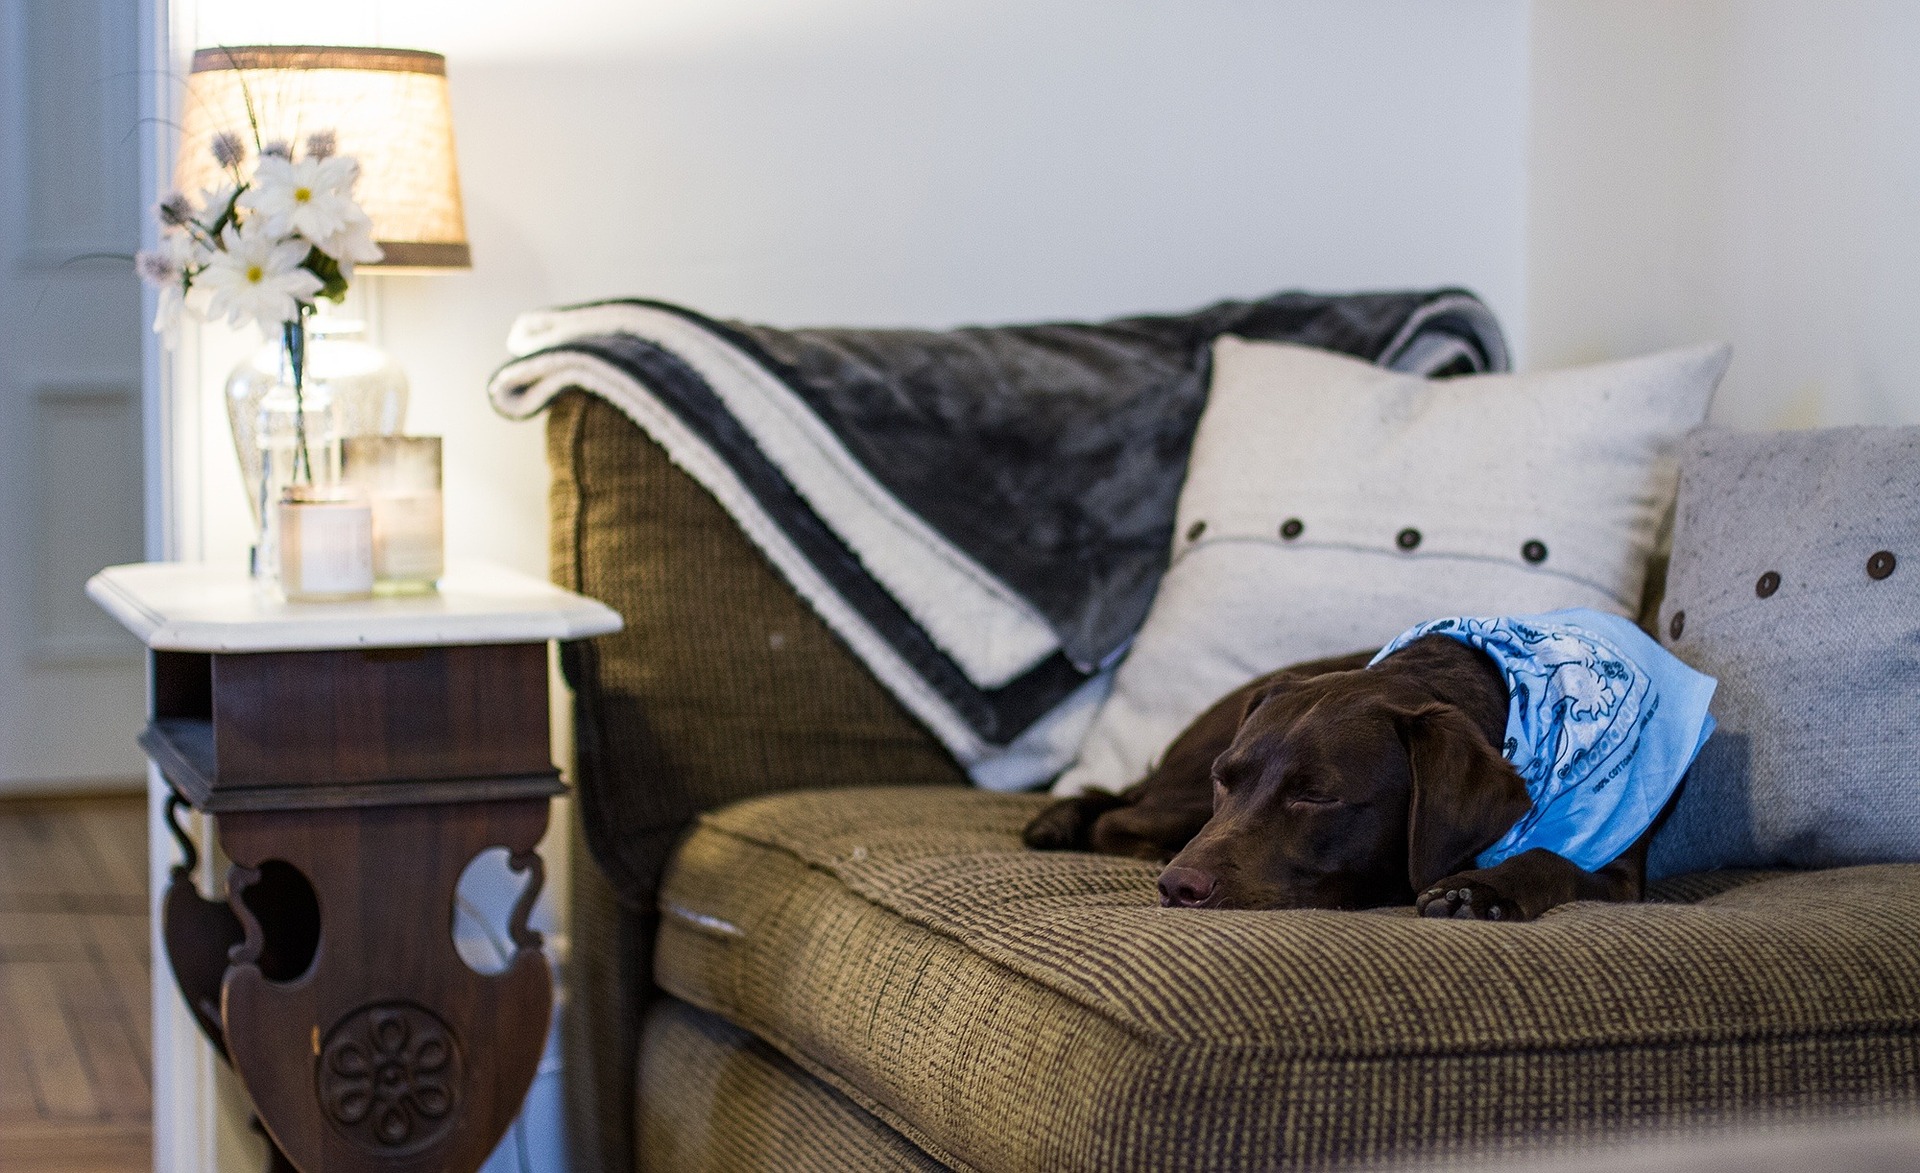 Dog on the couch, with blanket, pillows and lamp.